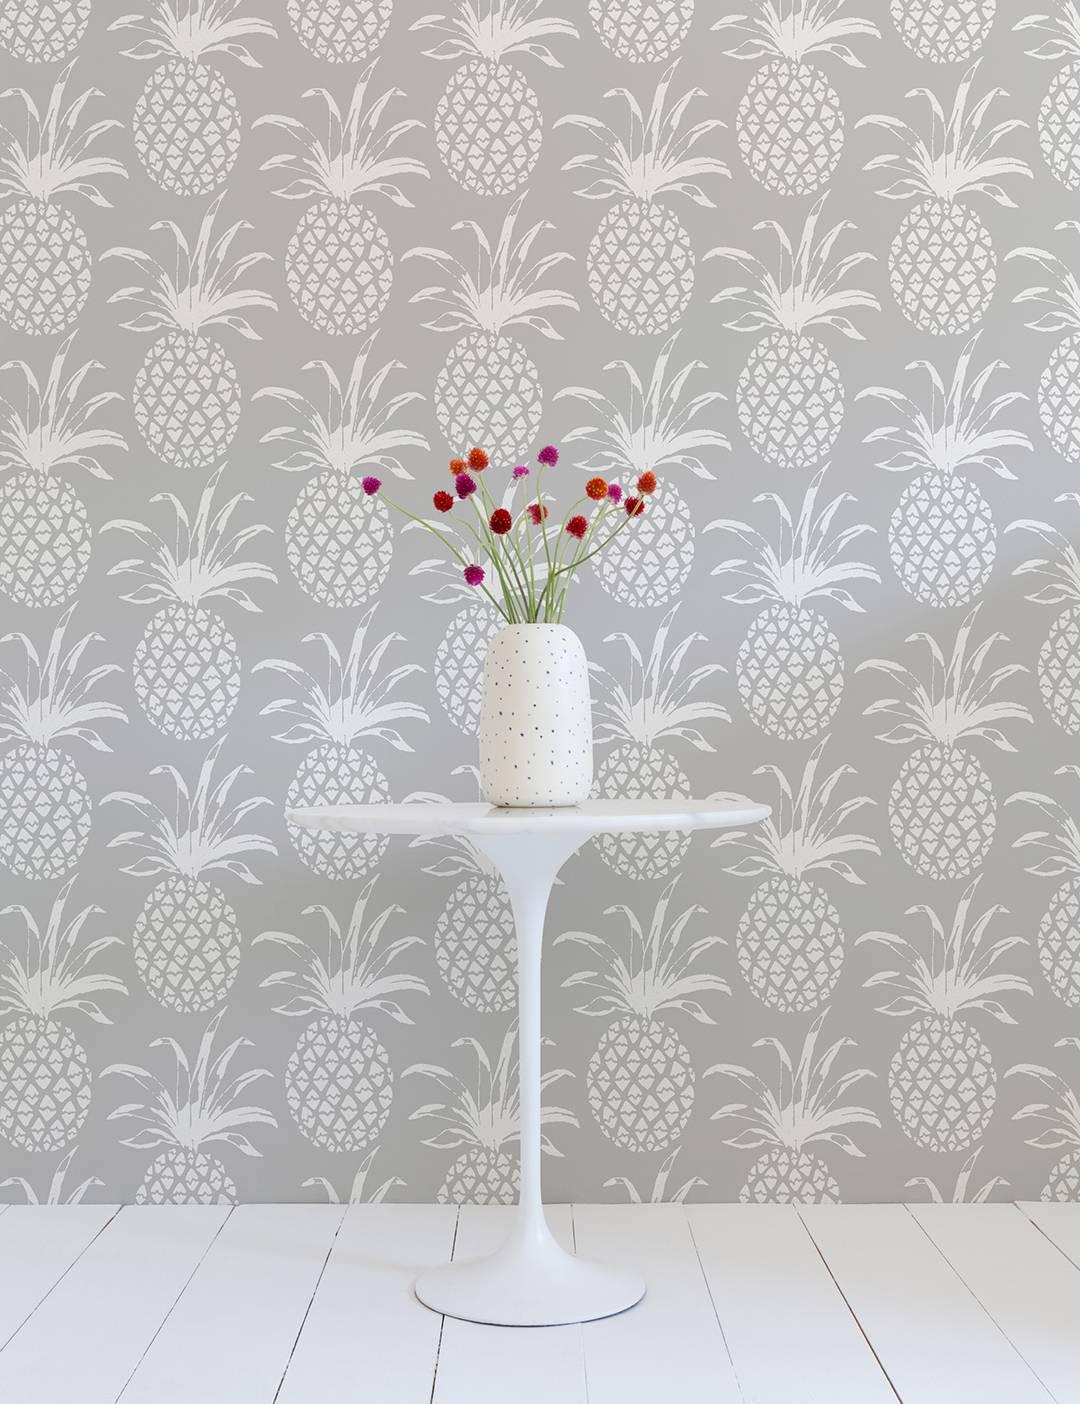 There's no better way to say welcome than with our pineapple wallpaper!
 
Samples are available for $18 including US shipping, please message us to purchase.  

Printing: Digital pigment print (minimum order of 4 rolls).
Material: FSC-certified